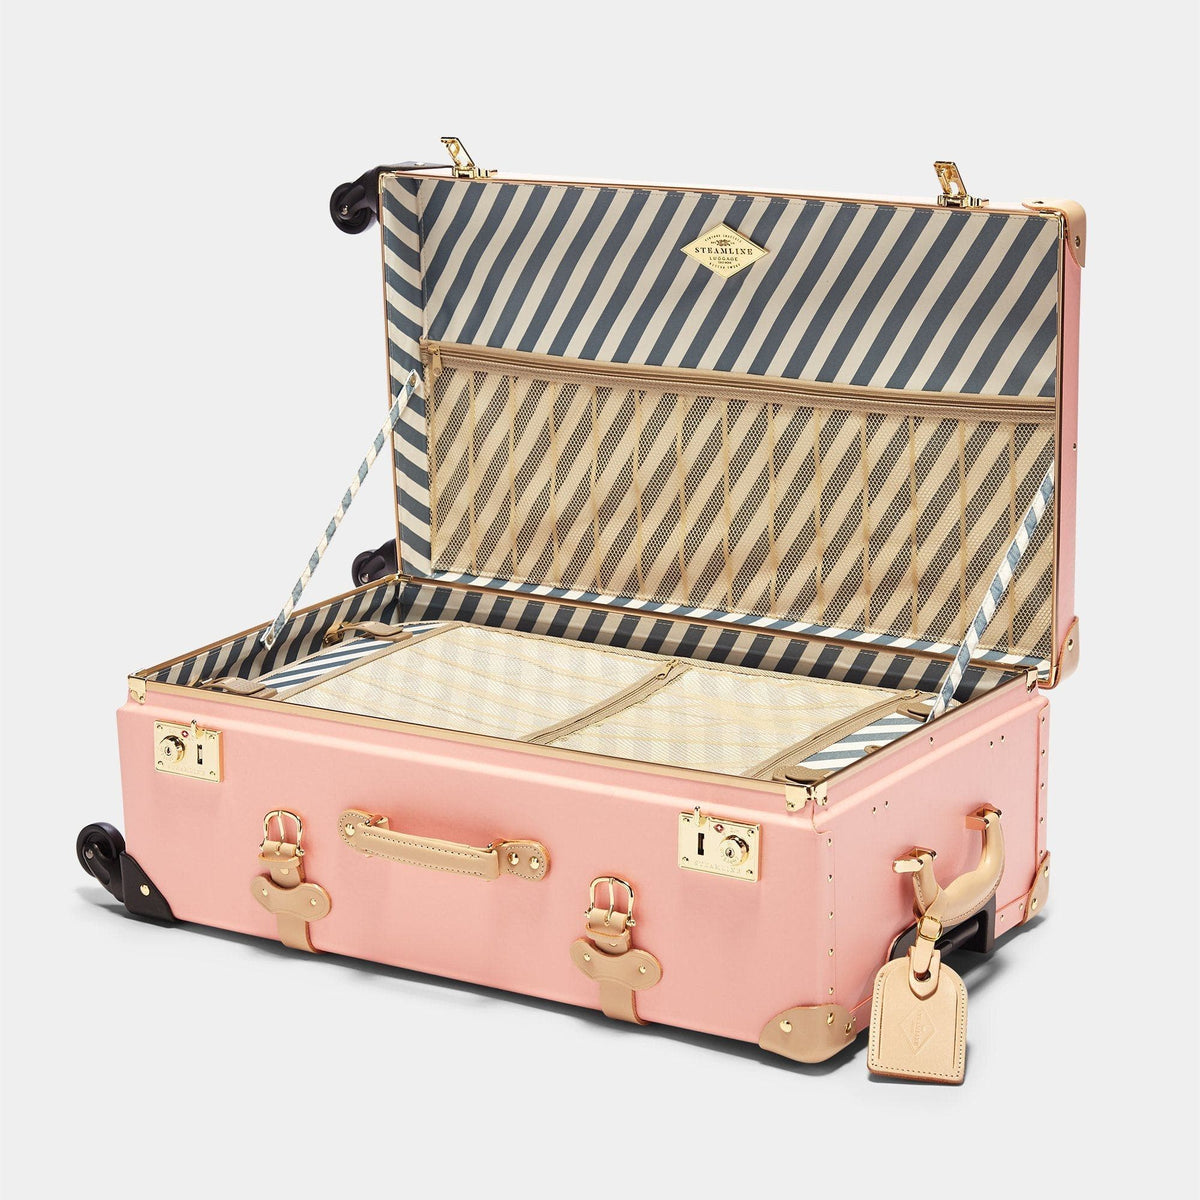 The Correspondent - Pink Check In Spinner Check In Spinner Steamline Luggage 